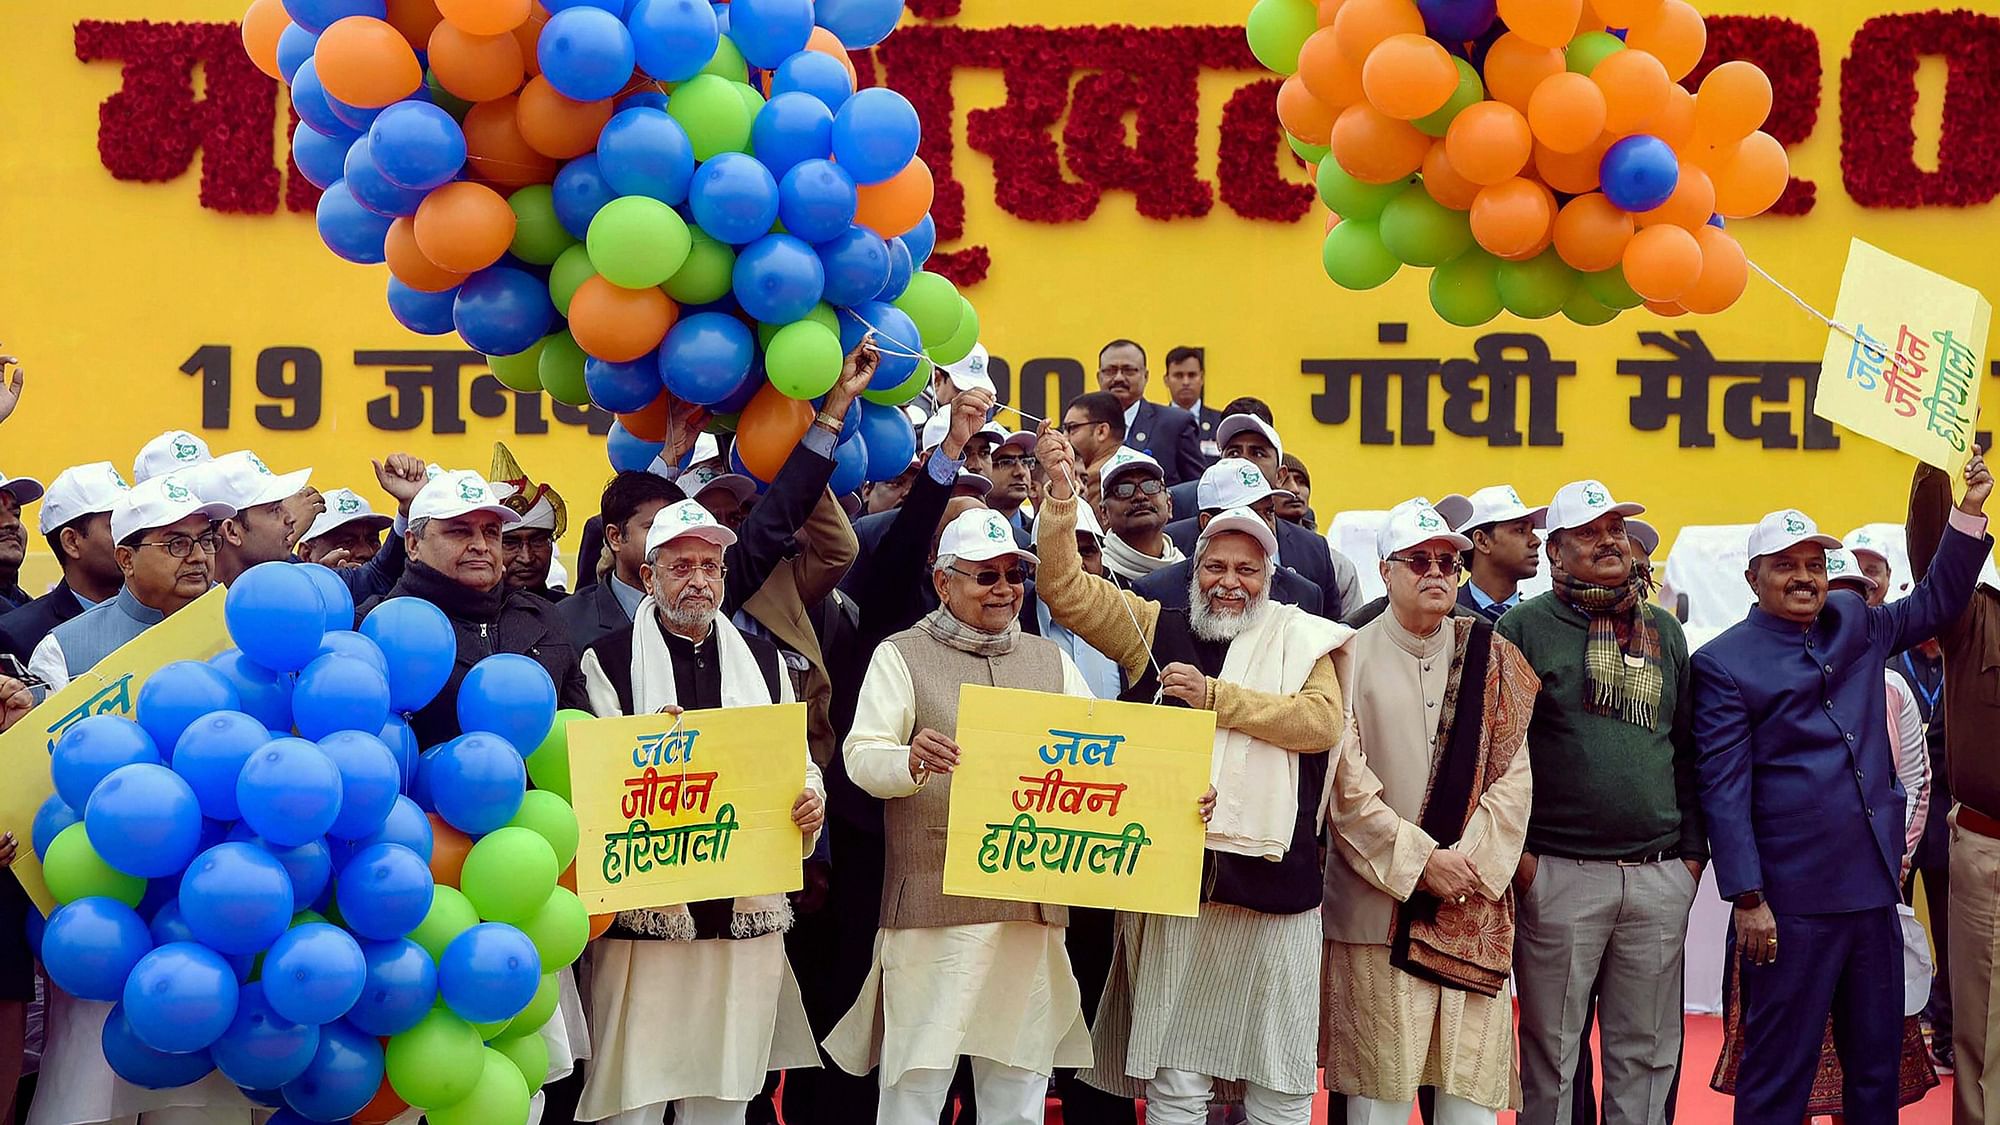 Bihar Chief Minister Nitish Kumar (4th L) along with deputy CM Sushil Kumar Modi (3rd L), Jal Purush Rajendra Singh (4th R) and others participates in forming a human chain in support of Jal Jivan Hariyali Movement against climate crisis, prohibition and social ills including dowry and child marriage in Patna on Sunday,19 January 2020.